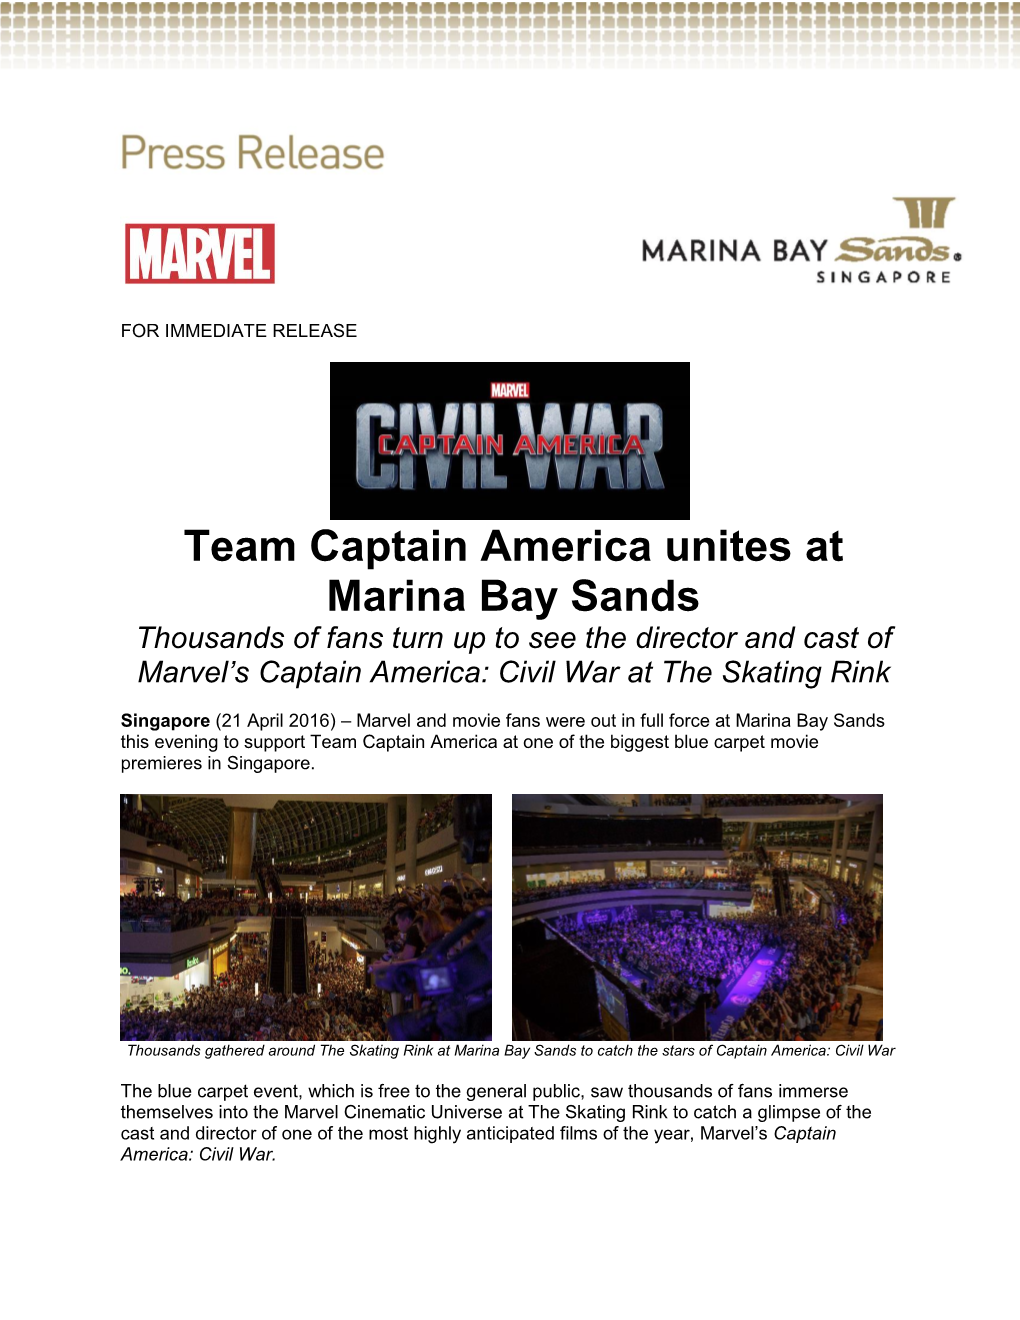 Team Captain America Unites at Marina Bay Sands Thousands of Fans Turn up to See the Director and Cast of Marvel’S Captain America: Civil War at the Skating Rink